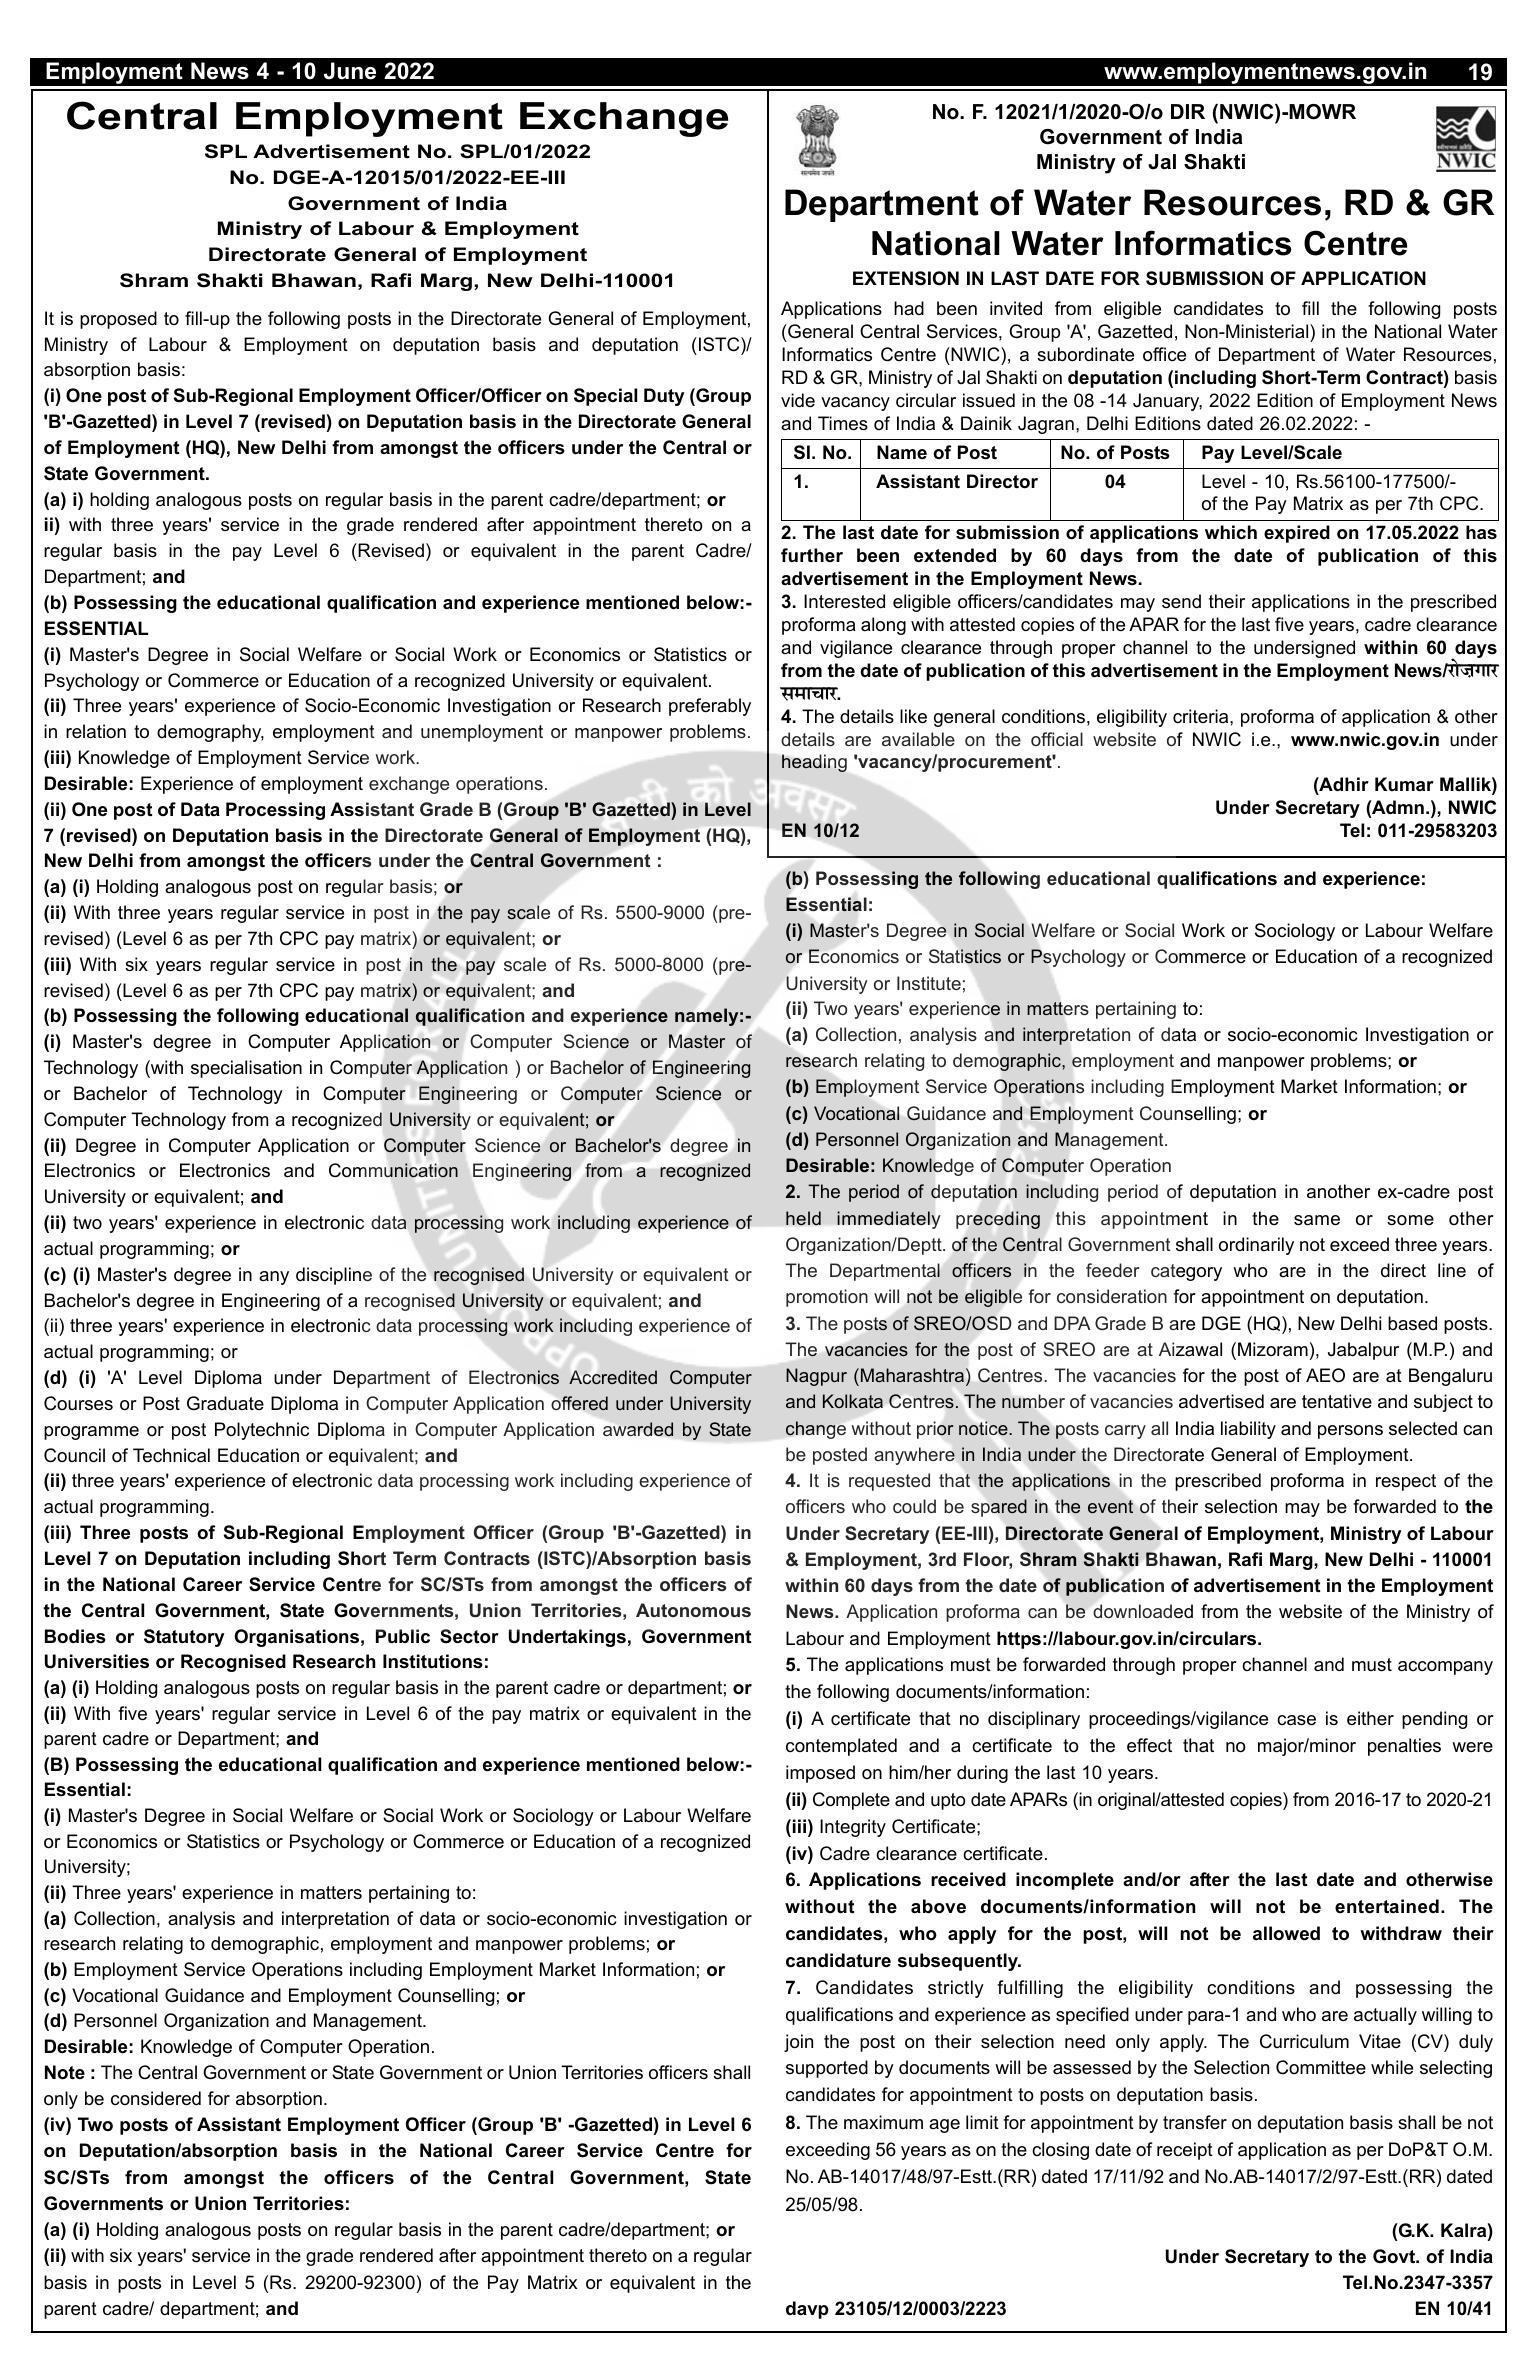 Directorate General of Employment (DGE) Various Posts Recruitment 2022 - Page 1